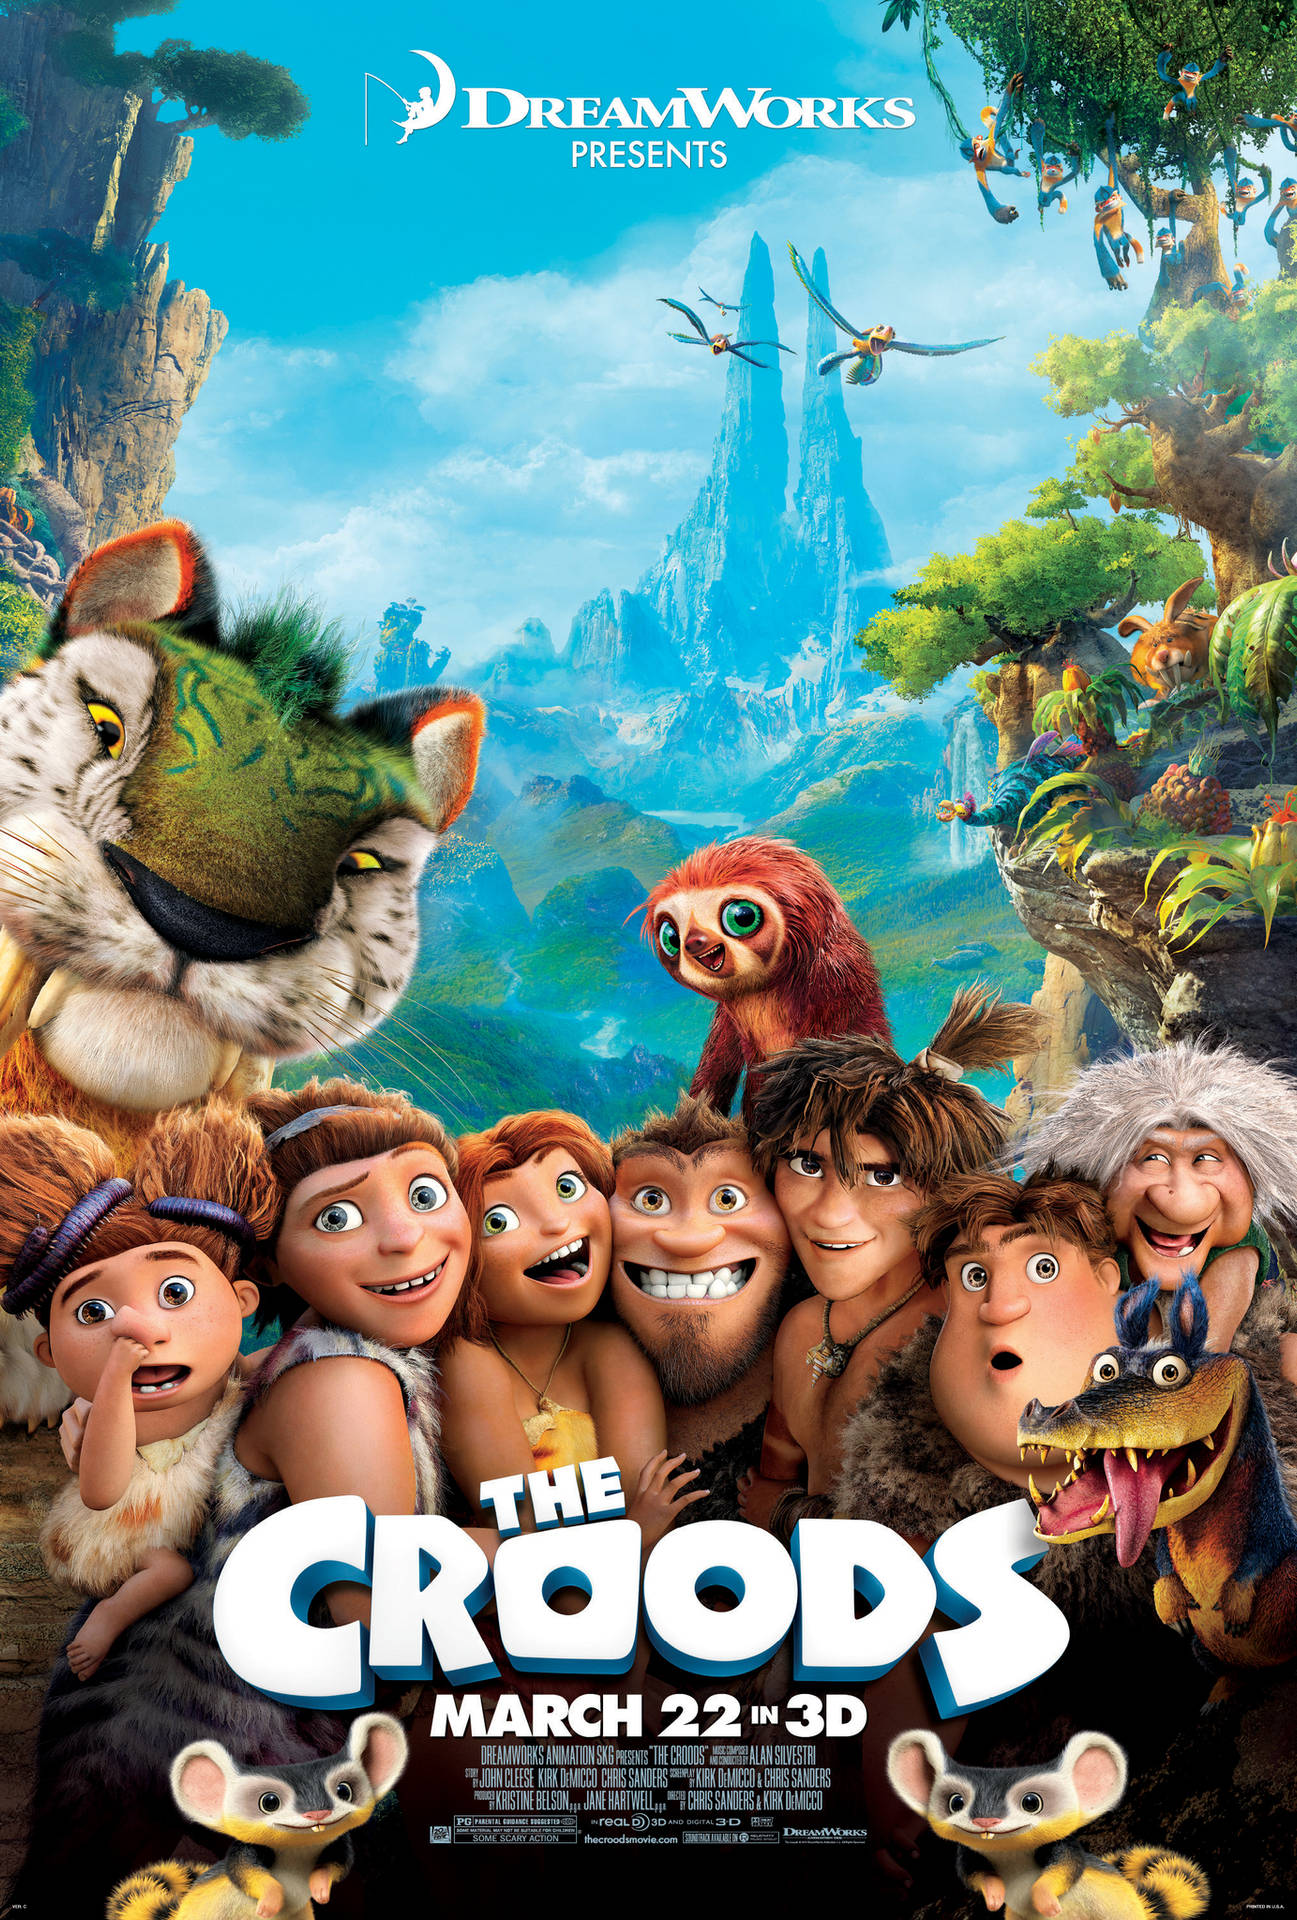 The Croods 3D Movie Poster Wallpaper